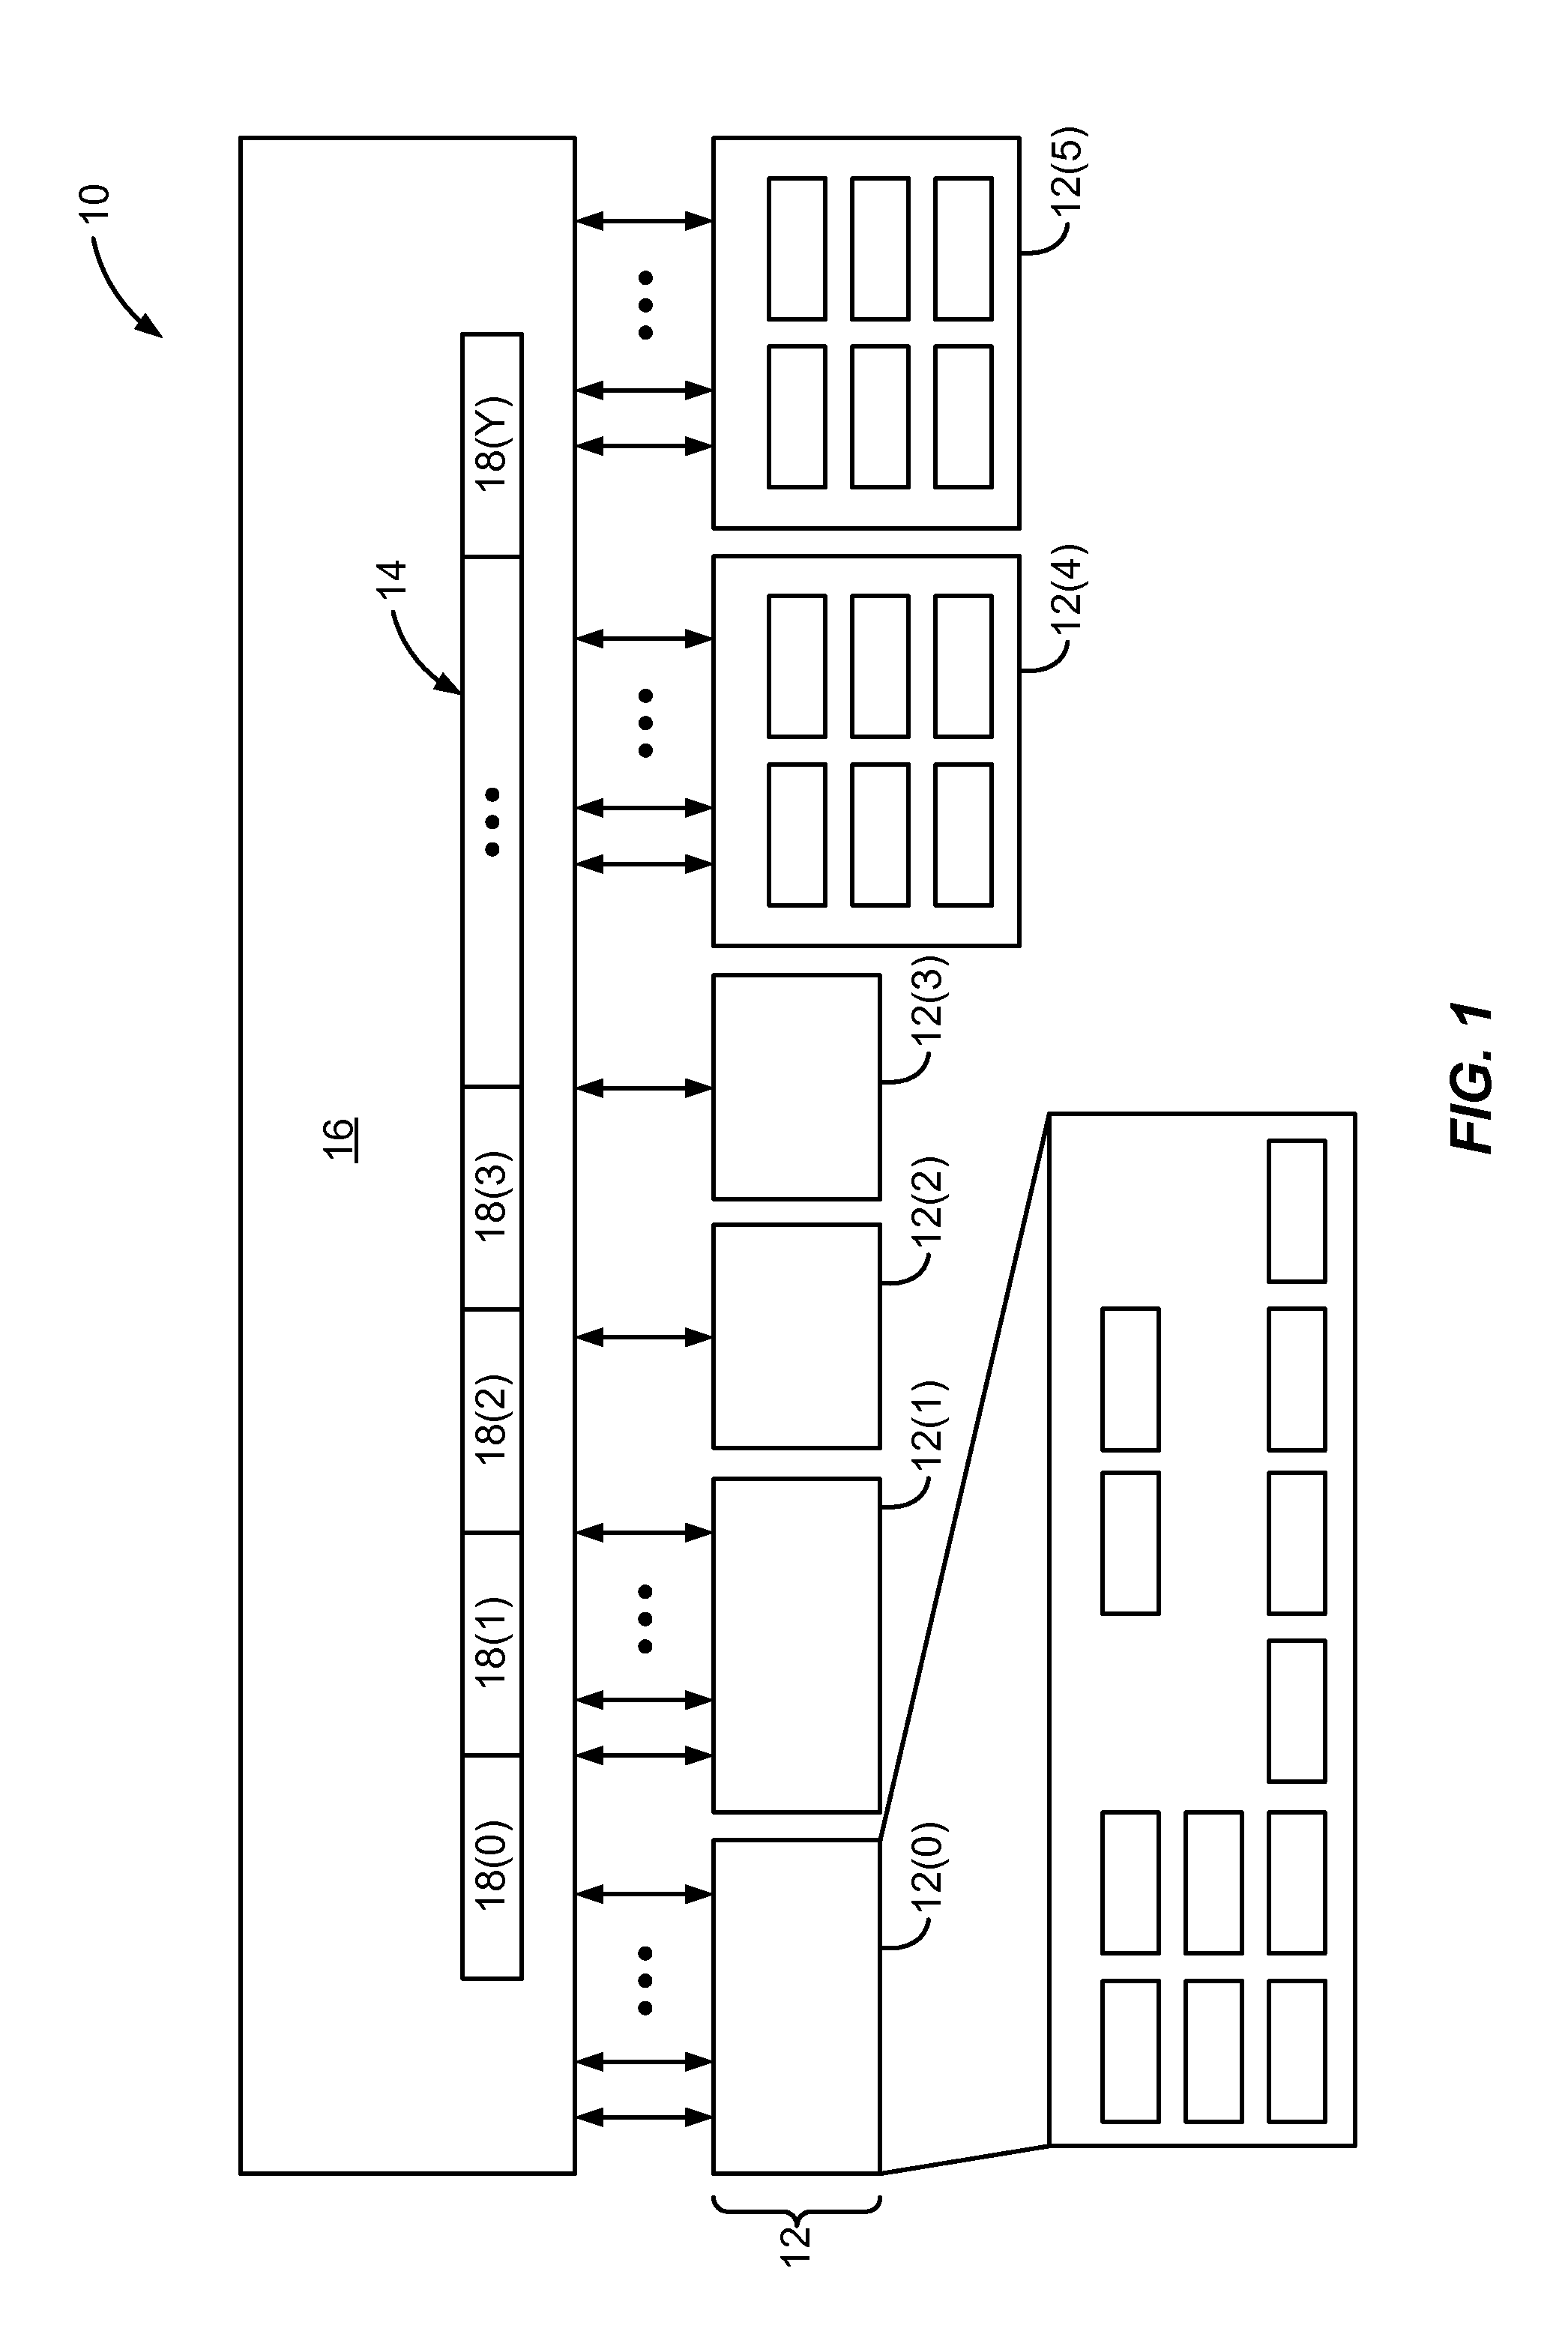 Vector processing carry-save accumulators employing redundant carry-save format to reduce carry propagation, and related vector processors, systems, and methods